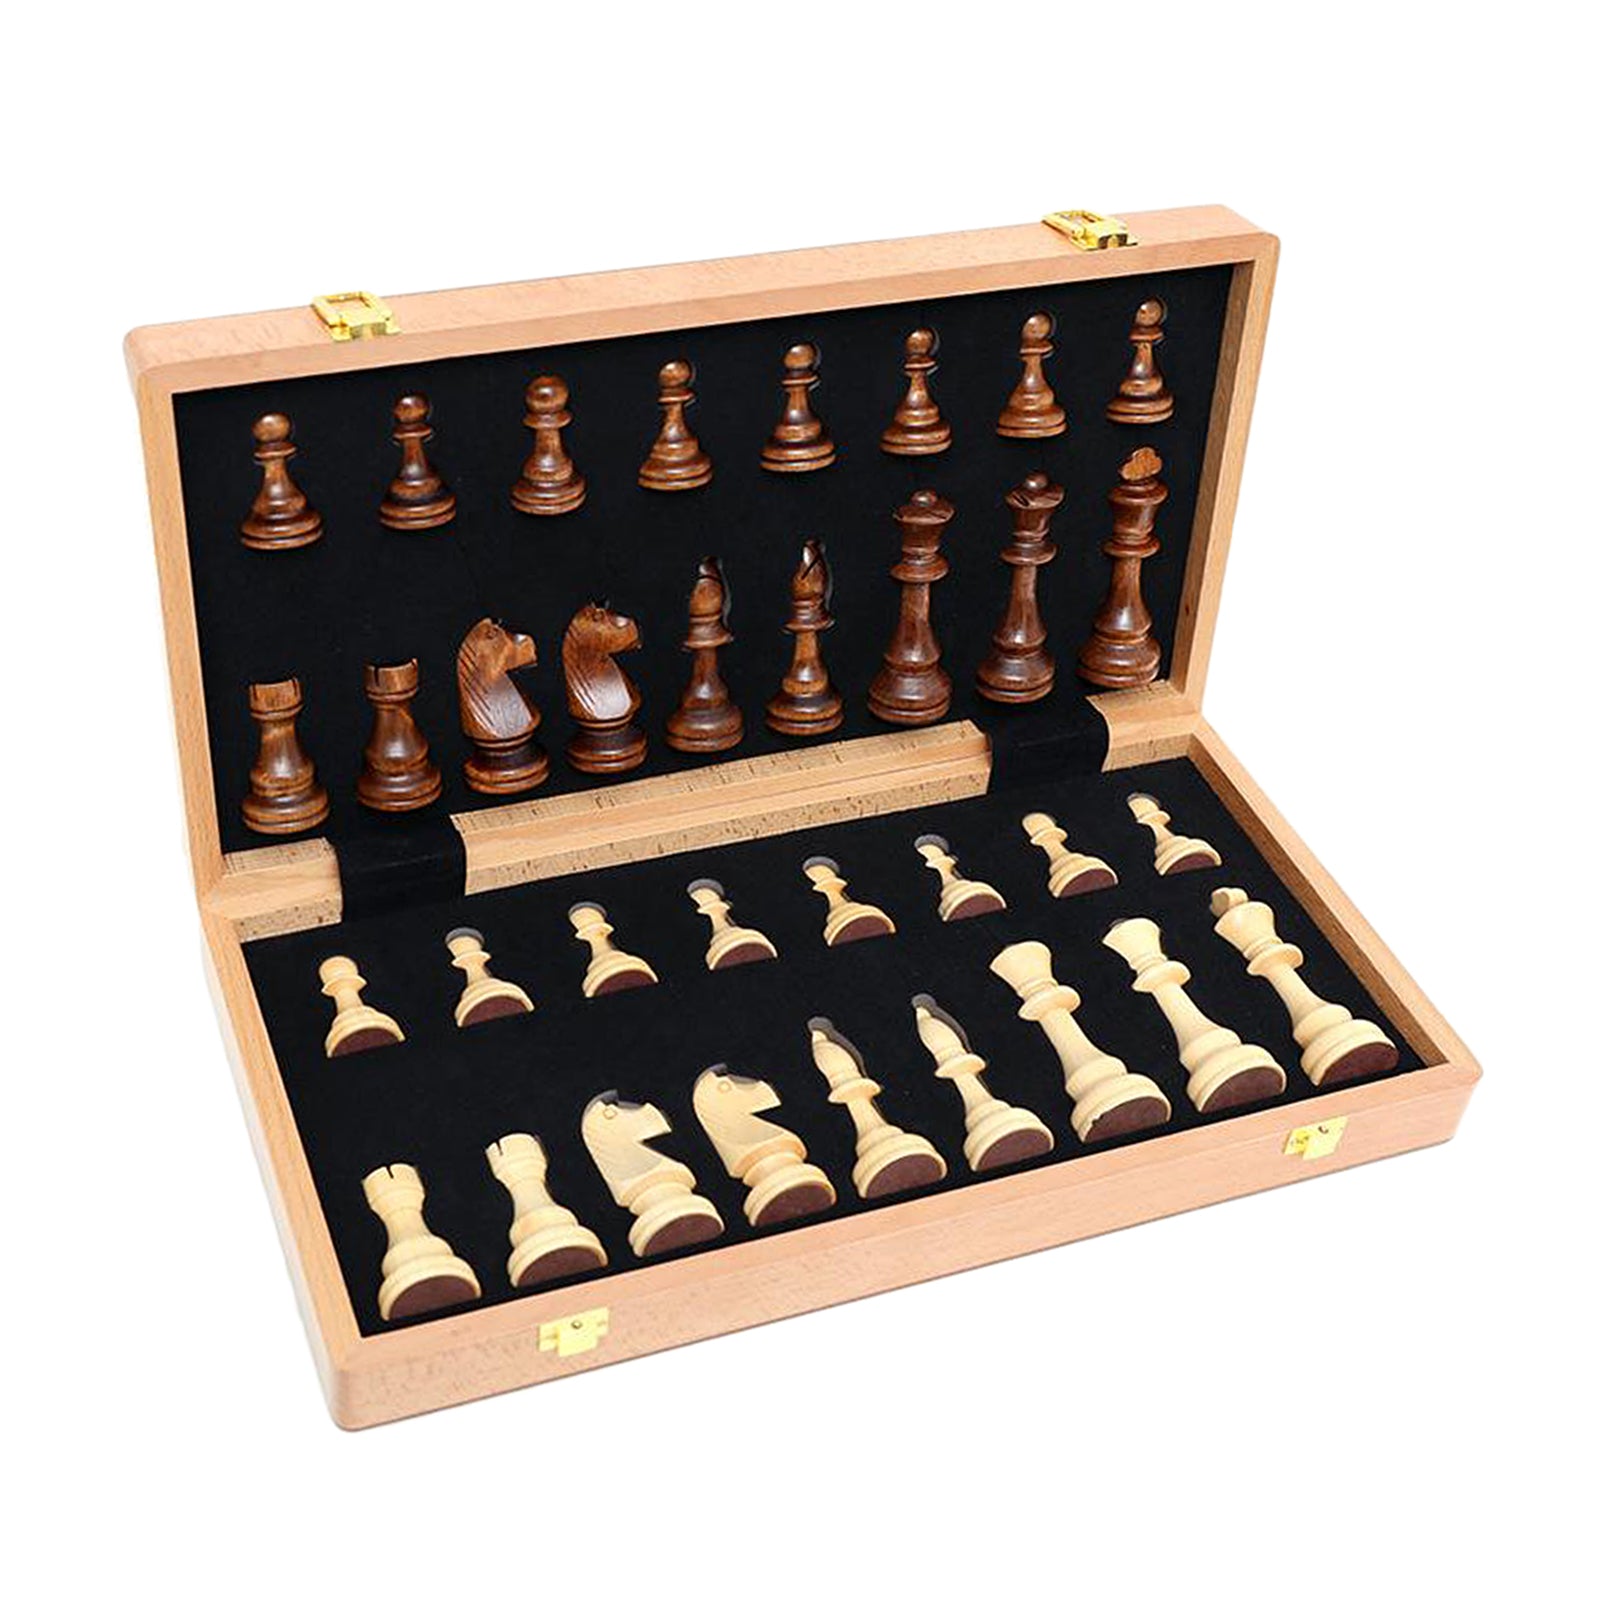 18''x 18'' Folding Wooden International Chess Set Board Game for Adults Kids